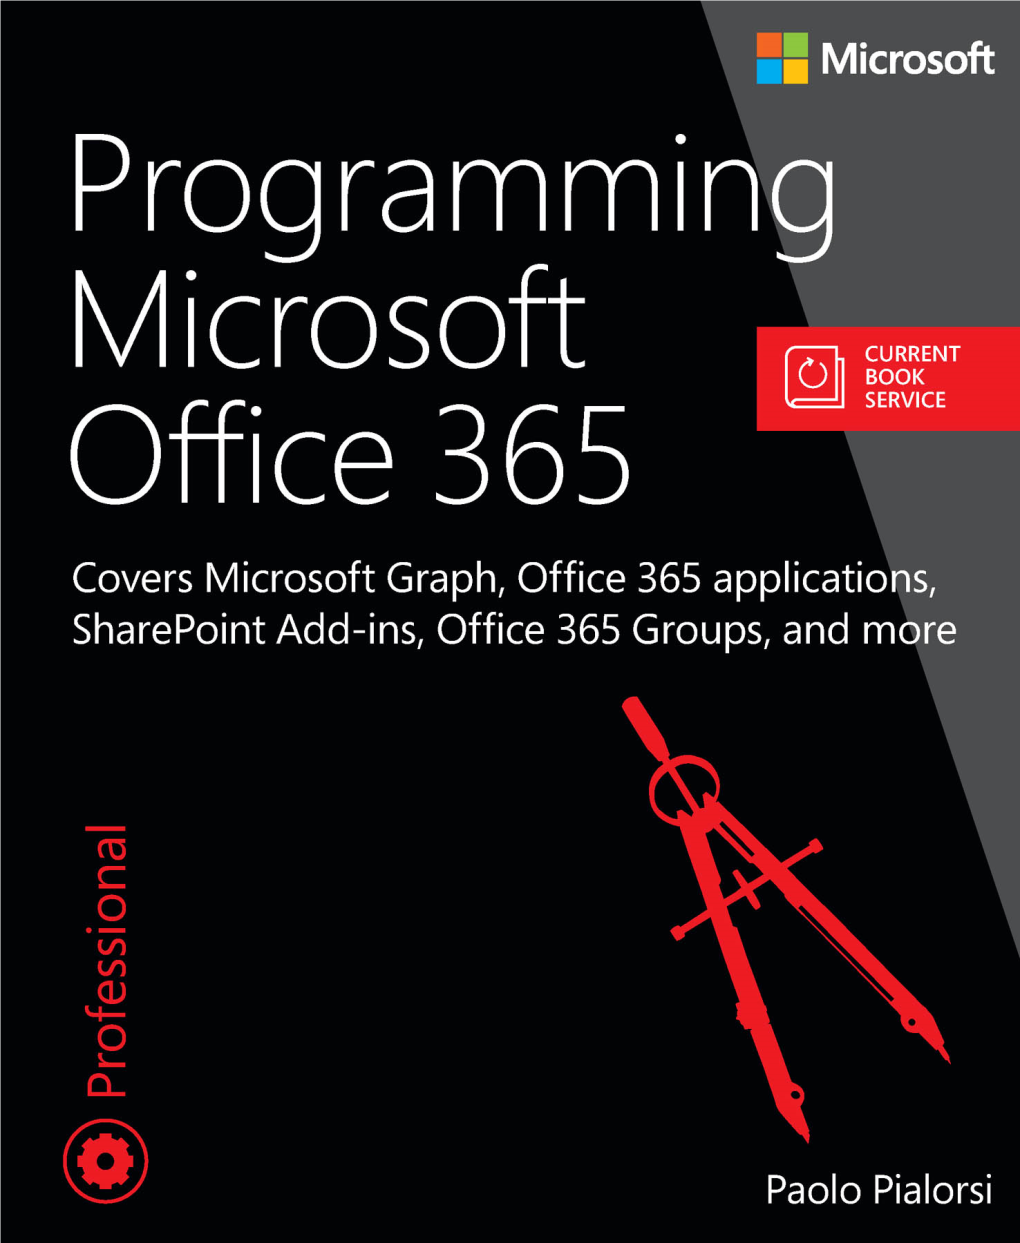 Programming Microsoft Office 365 Covers Microsoft Graph, Office 365 Applications, Sharepoint Add-Ins, Office 365 Groups, and More